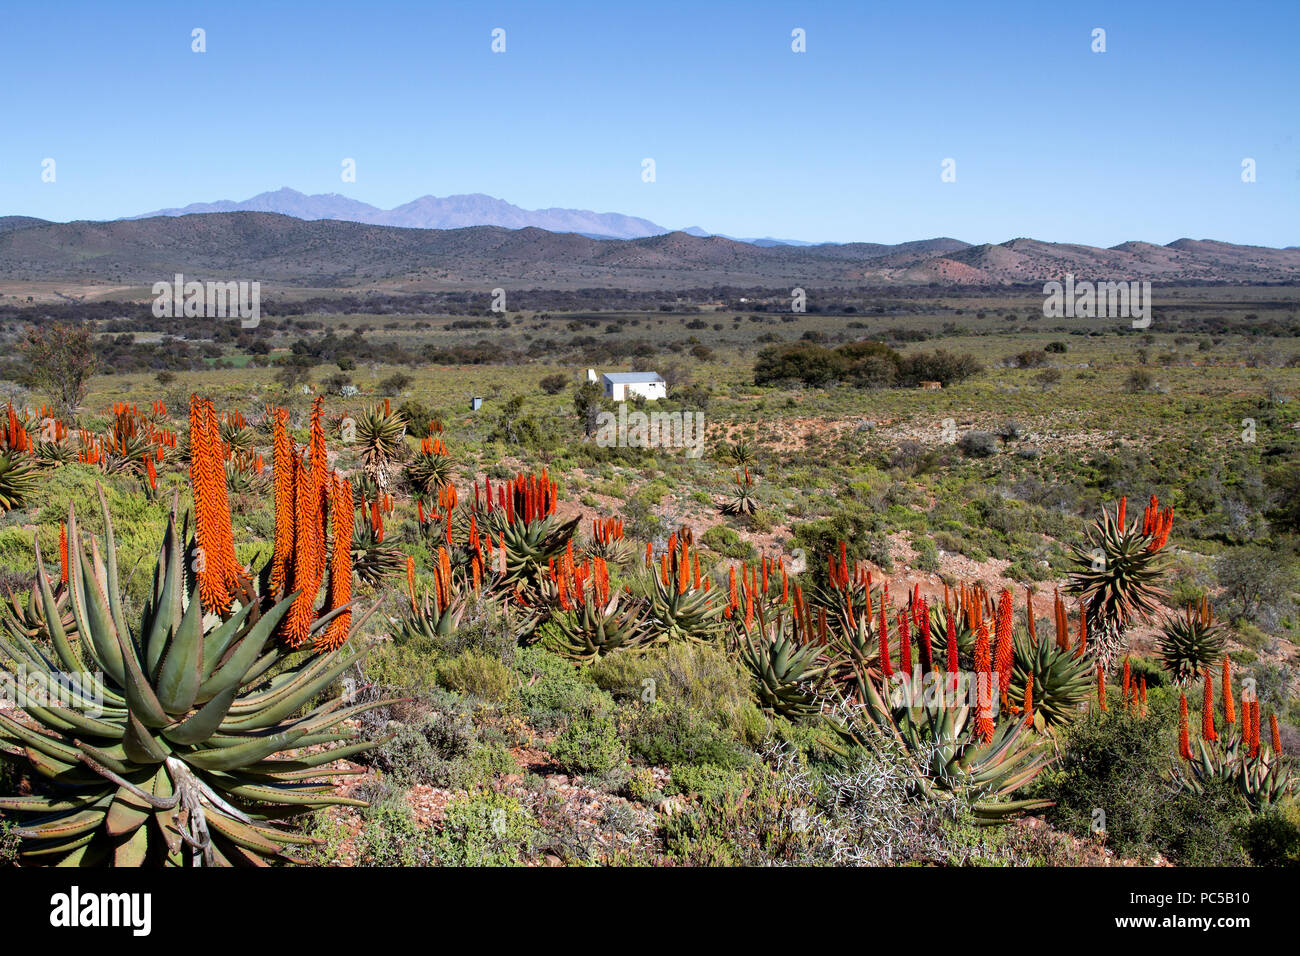 Flowering aloes with farm worker's home Stock Photo